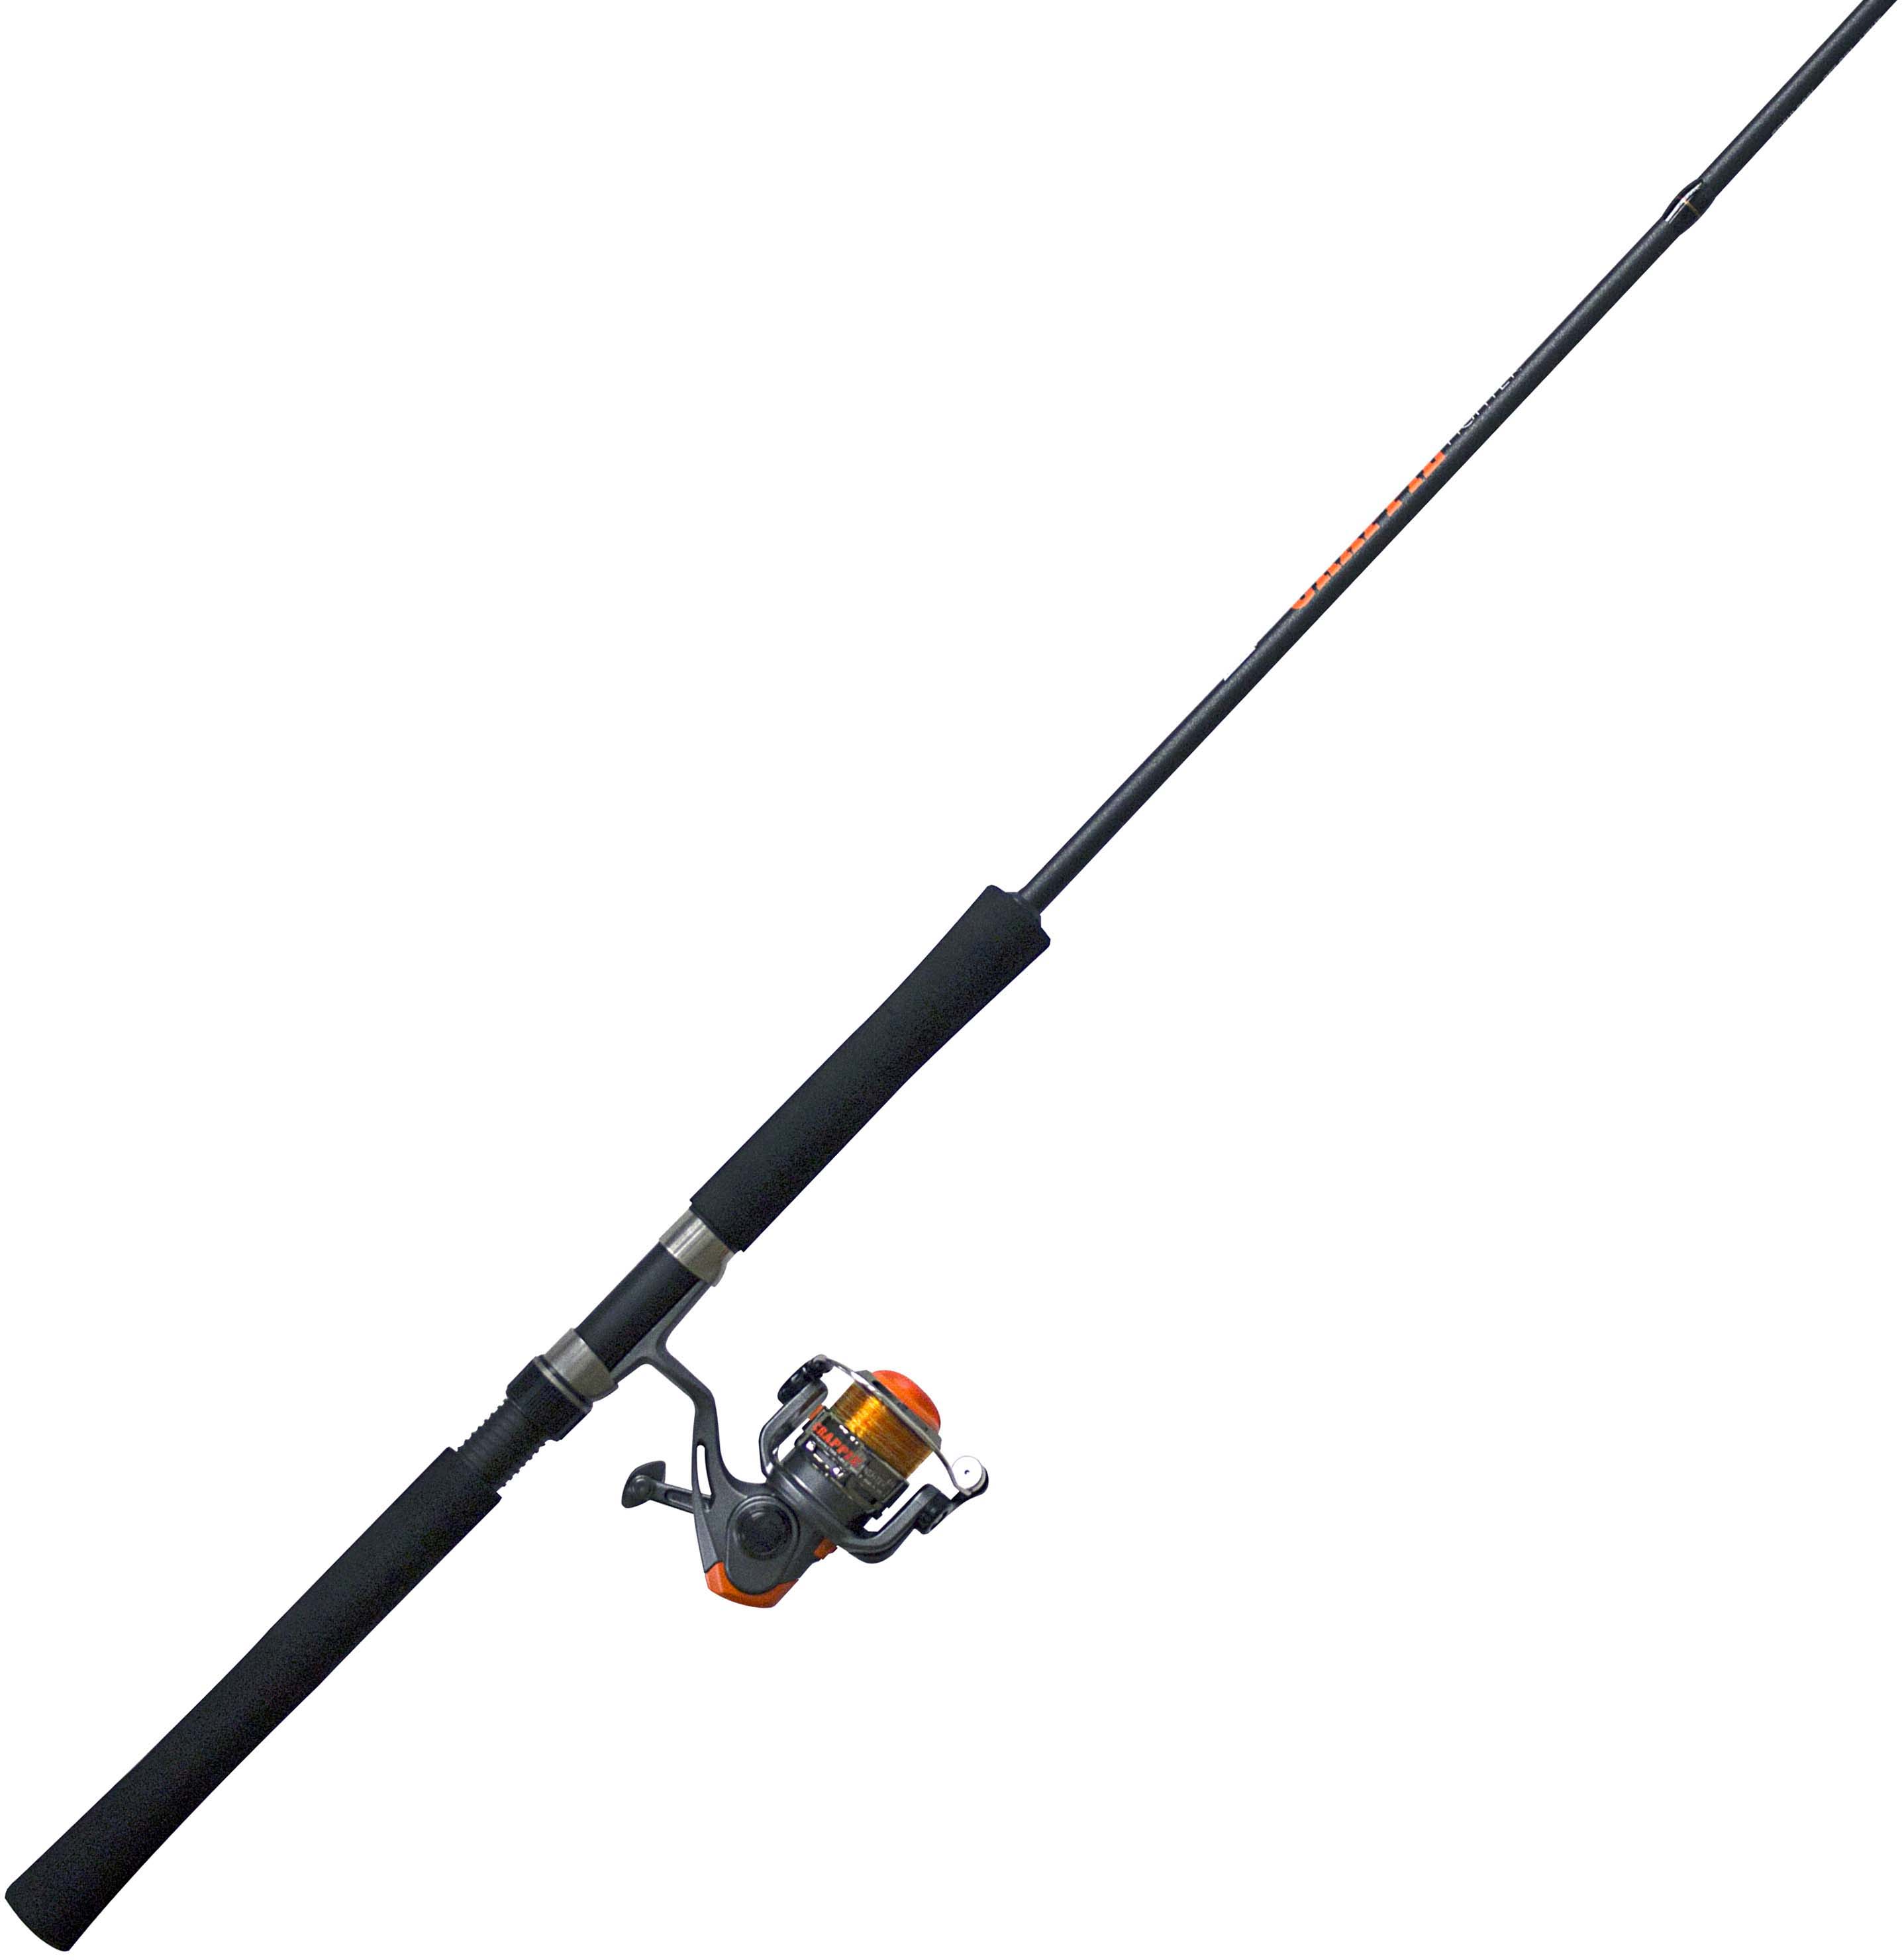  Zebco 606 Spincast Reel and Fishing Rod Combo, 6-Foot